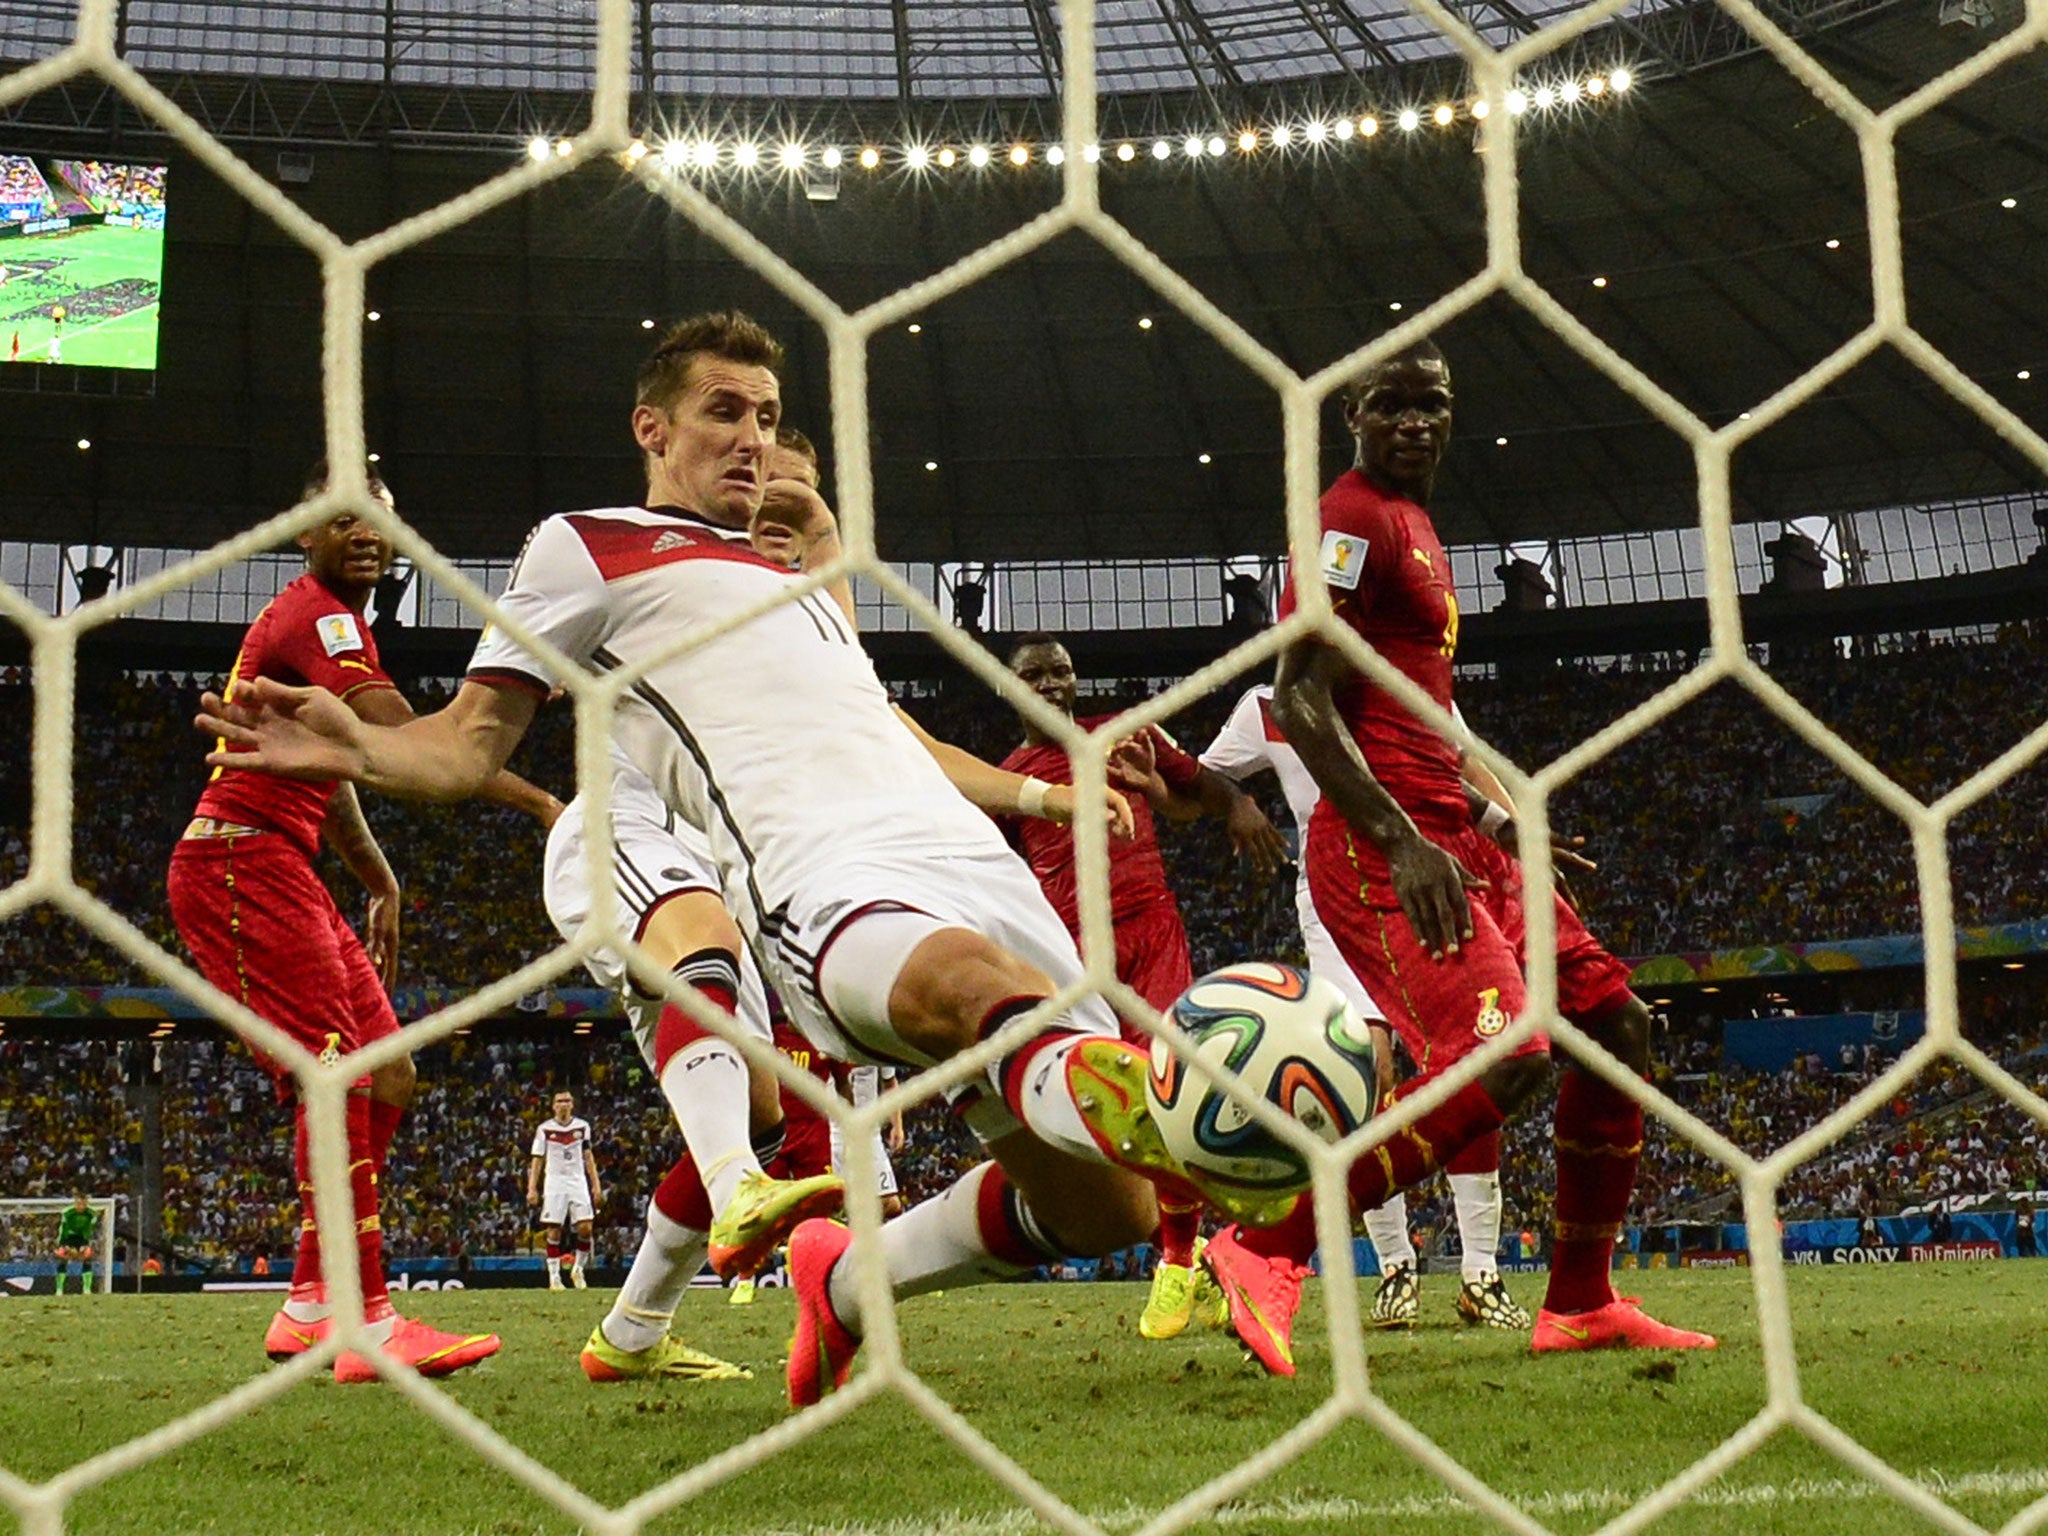 Miroslav Klose scores Germany's second goal in the 2-2 draw with Ghana